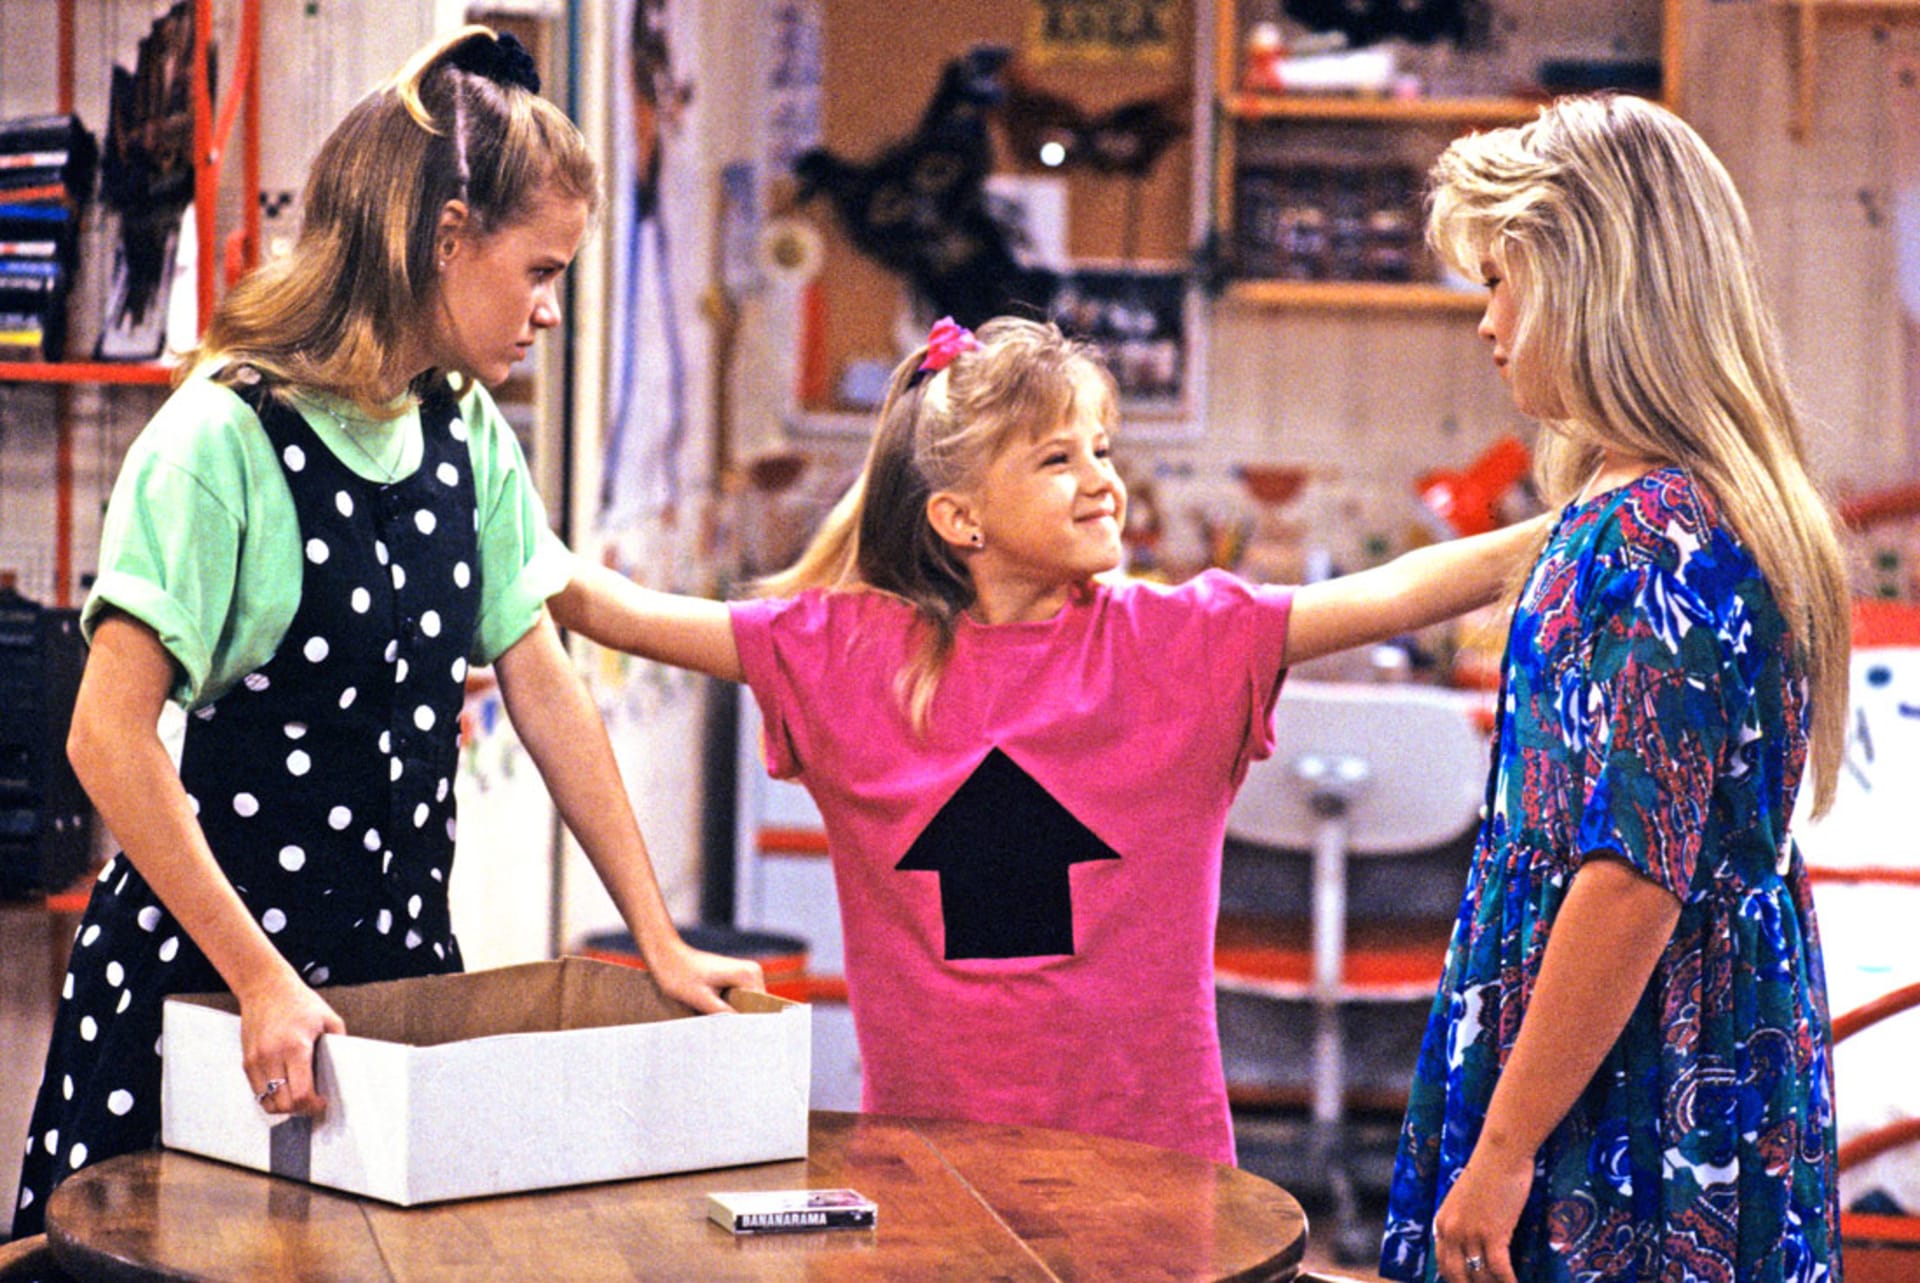 Andrea Full House Porn - Jodie Sweetin Returns to 'Full House' | Complex